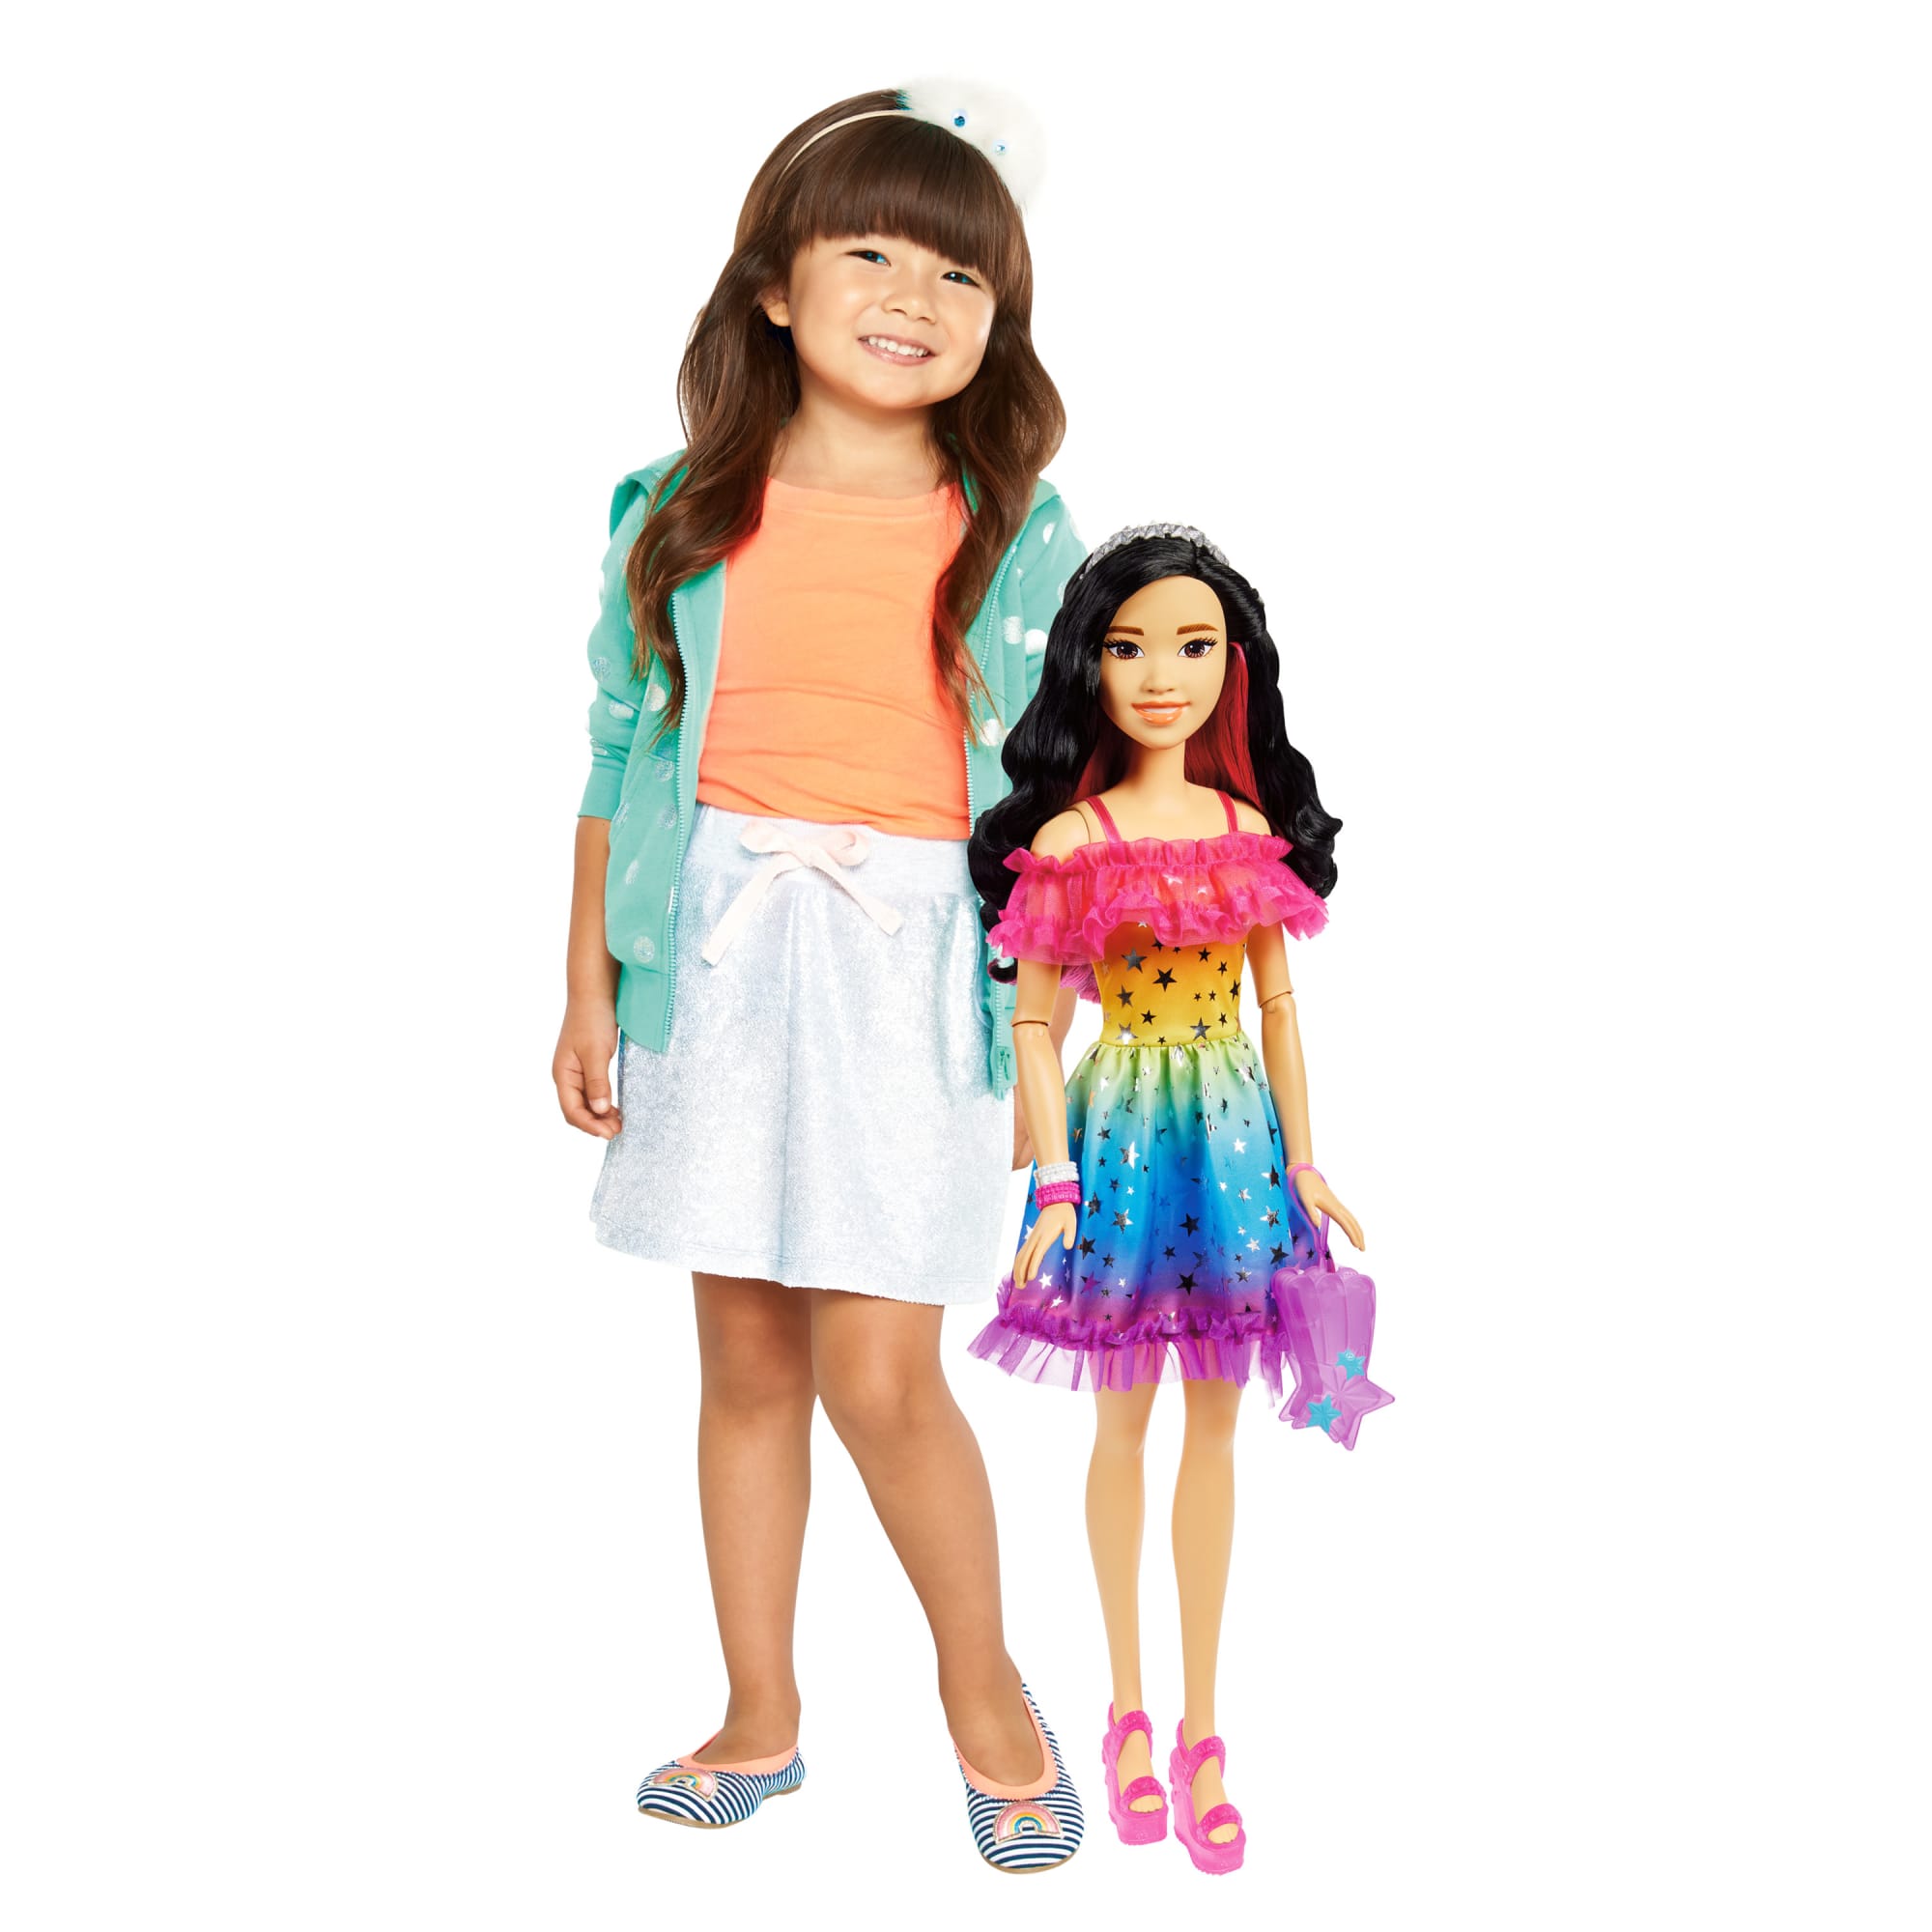 Playtime is larger than life with this Barbie doll that stands over two  feet tall and wears a rainbow dress! Browse Barbie toys and gifts at Shop. Mattel.com.